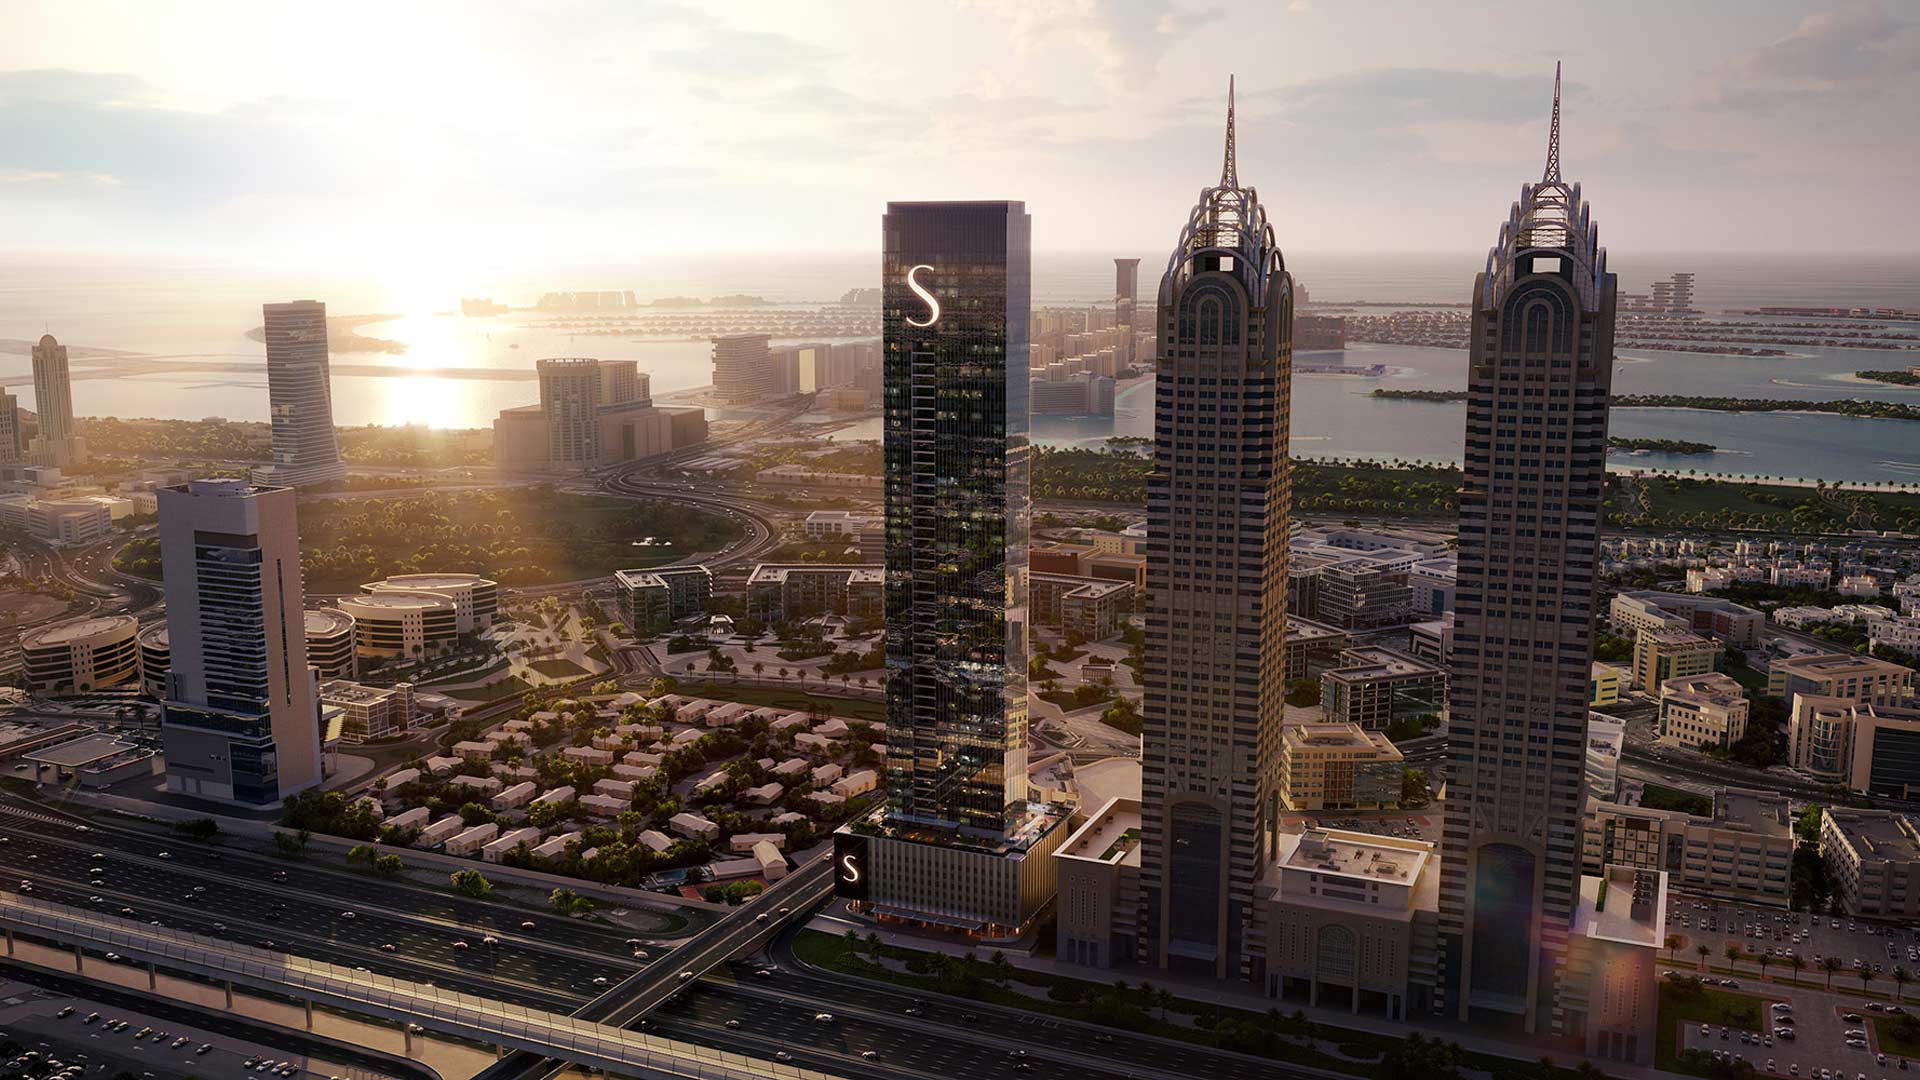 THE S TOWER by Sobha Realty in Al Sufouh, Dubai, UAE